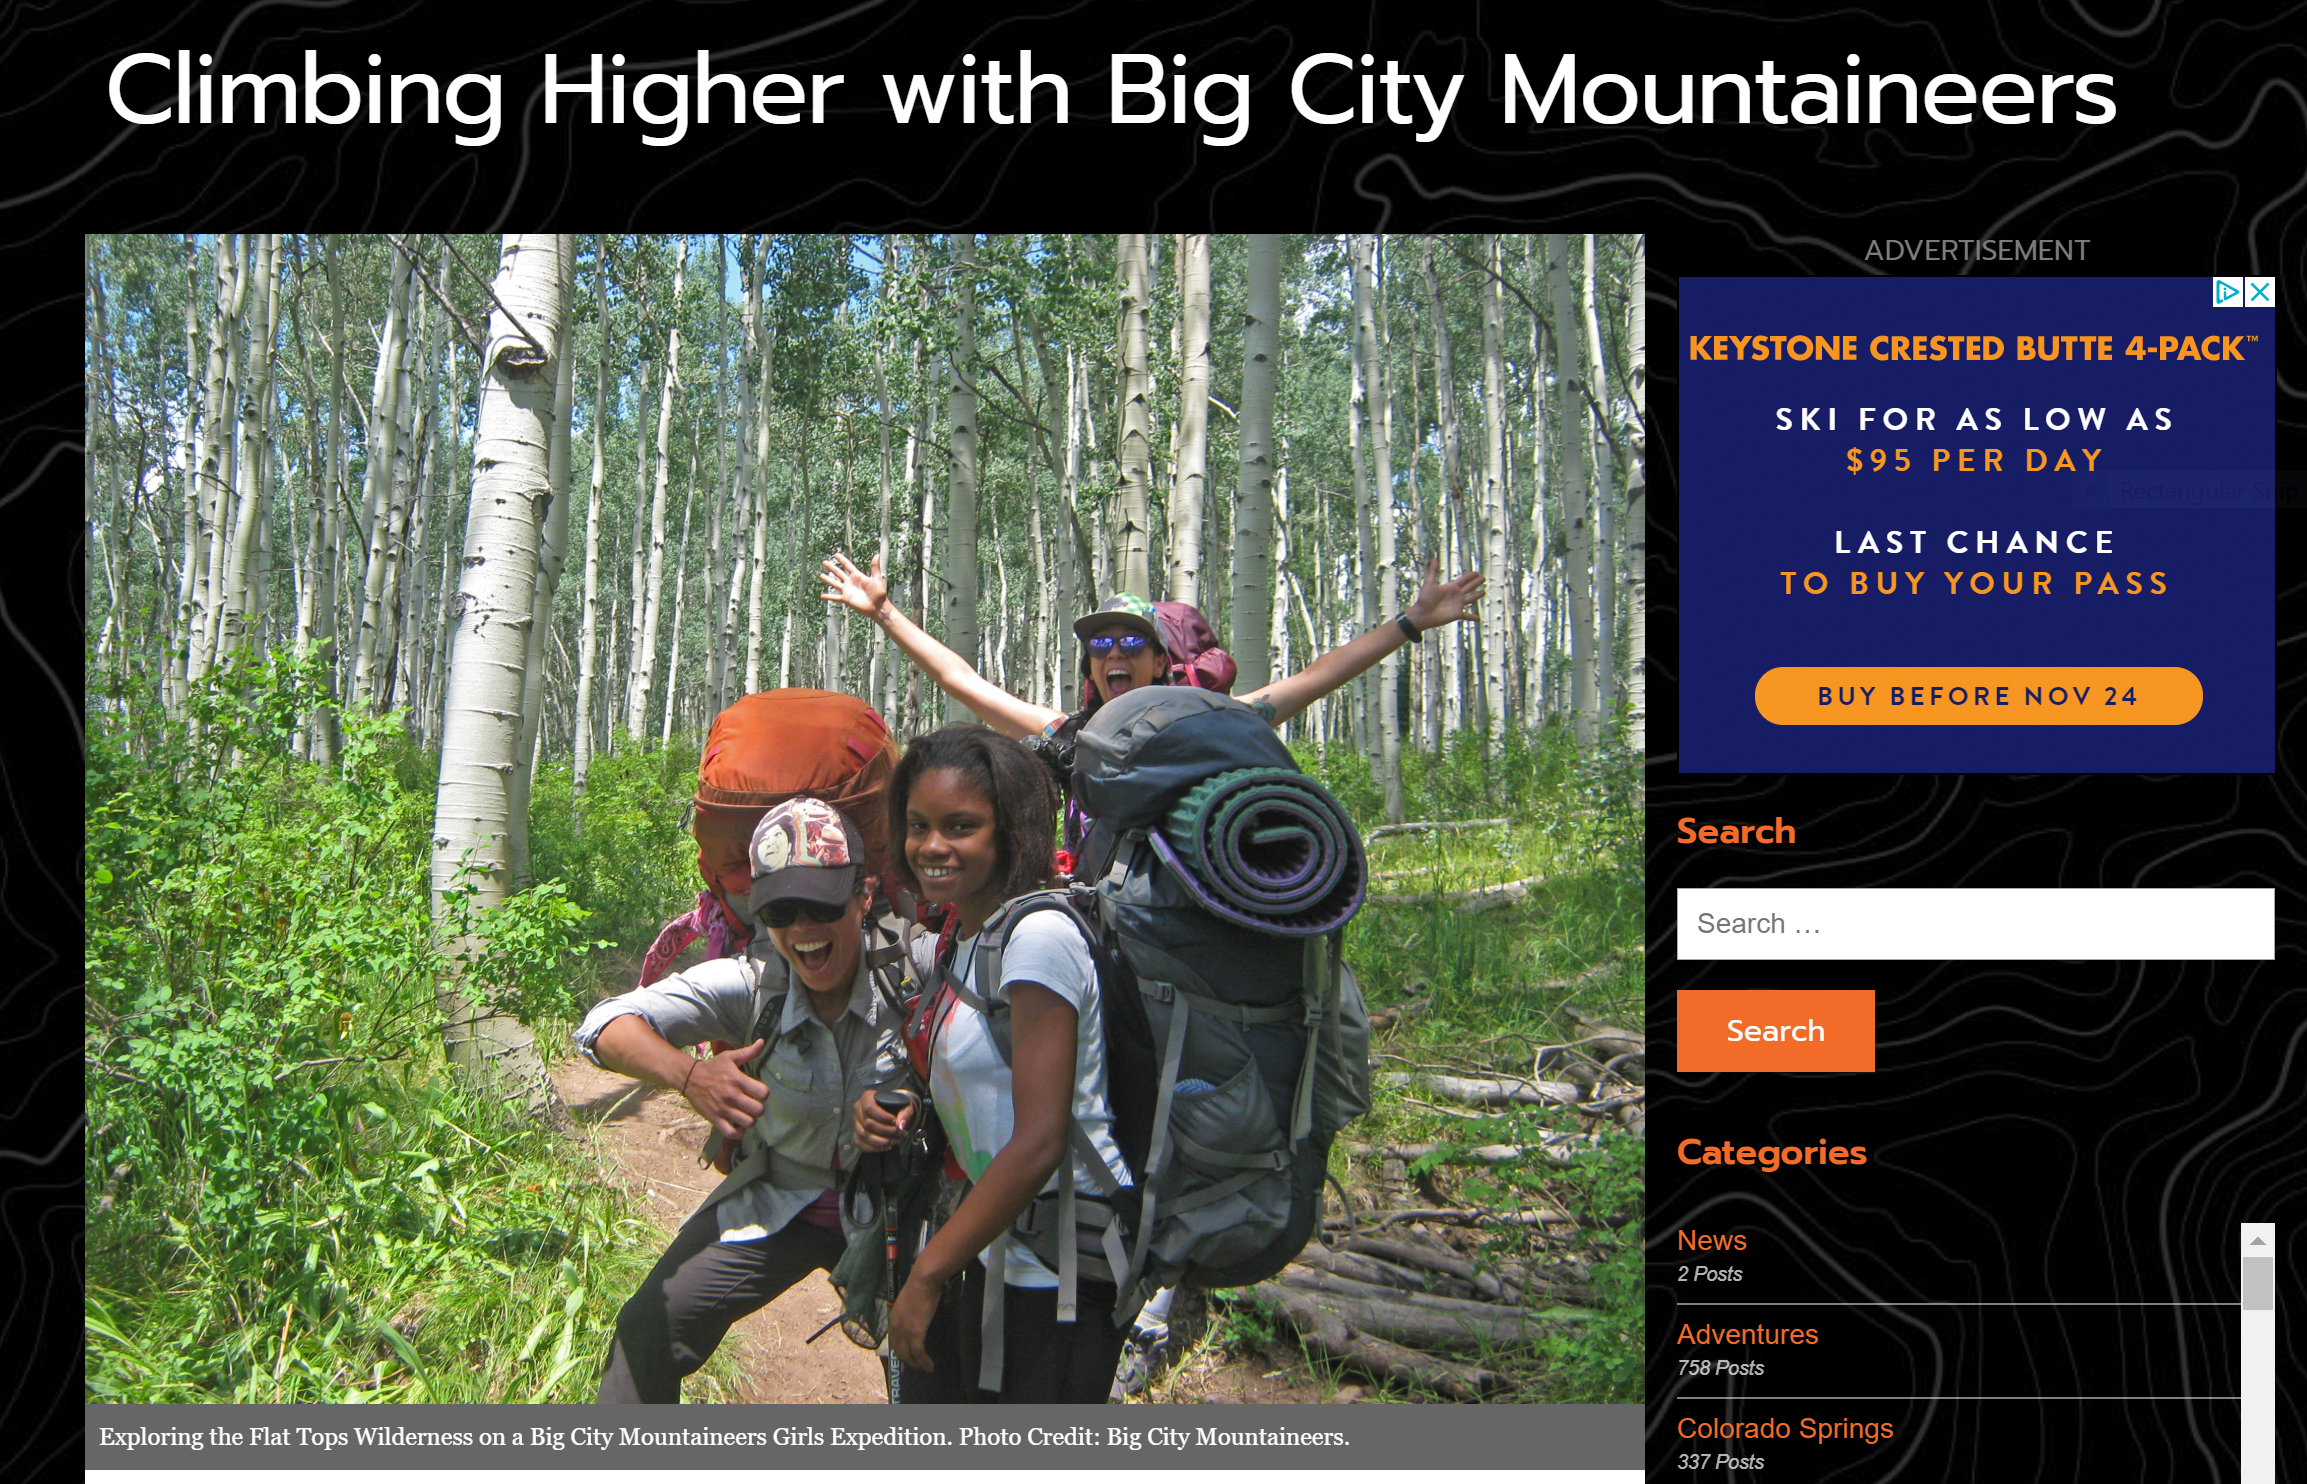 OutThere Colorado, "Climbing Higher With Big City Mountaineers"